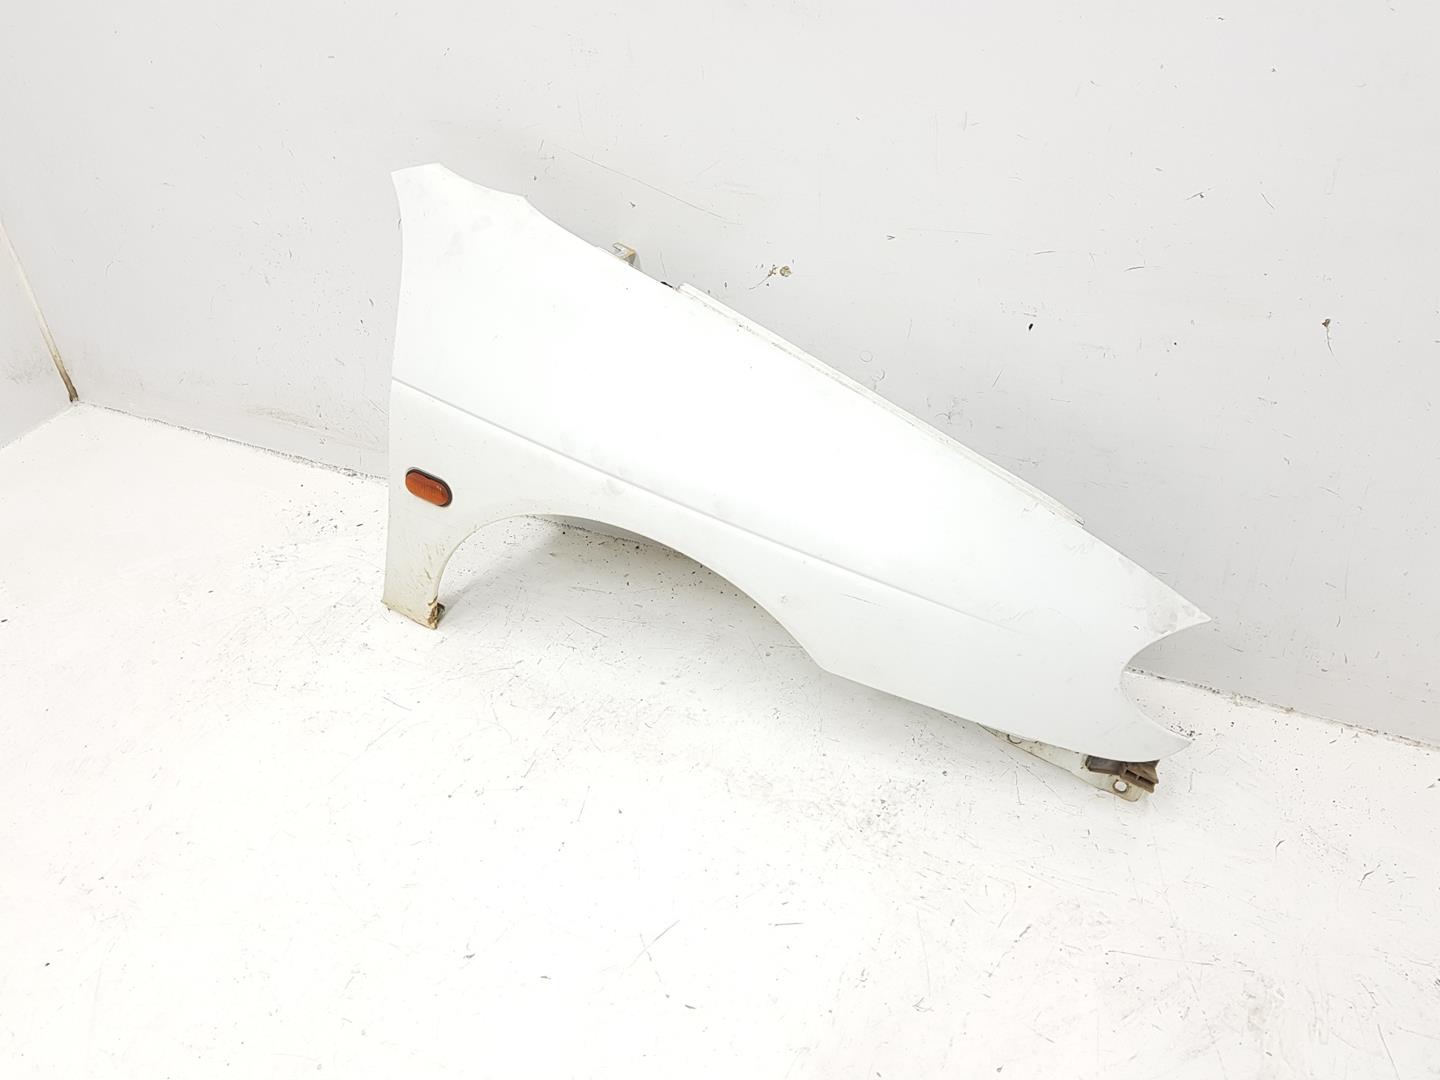 RENAULT Megane 1 generation (1995-2003) Front Right Fender 7751696569, 7751696569, COLORBLANCOHIELOO389 21625230